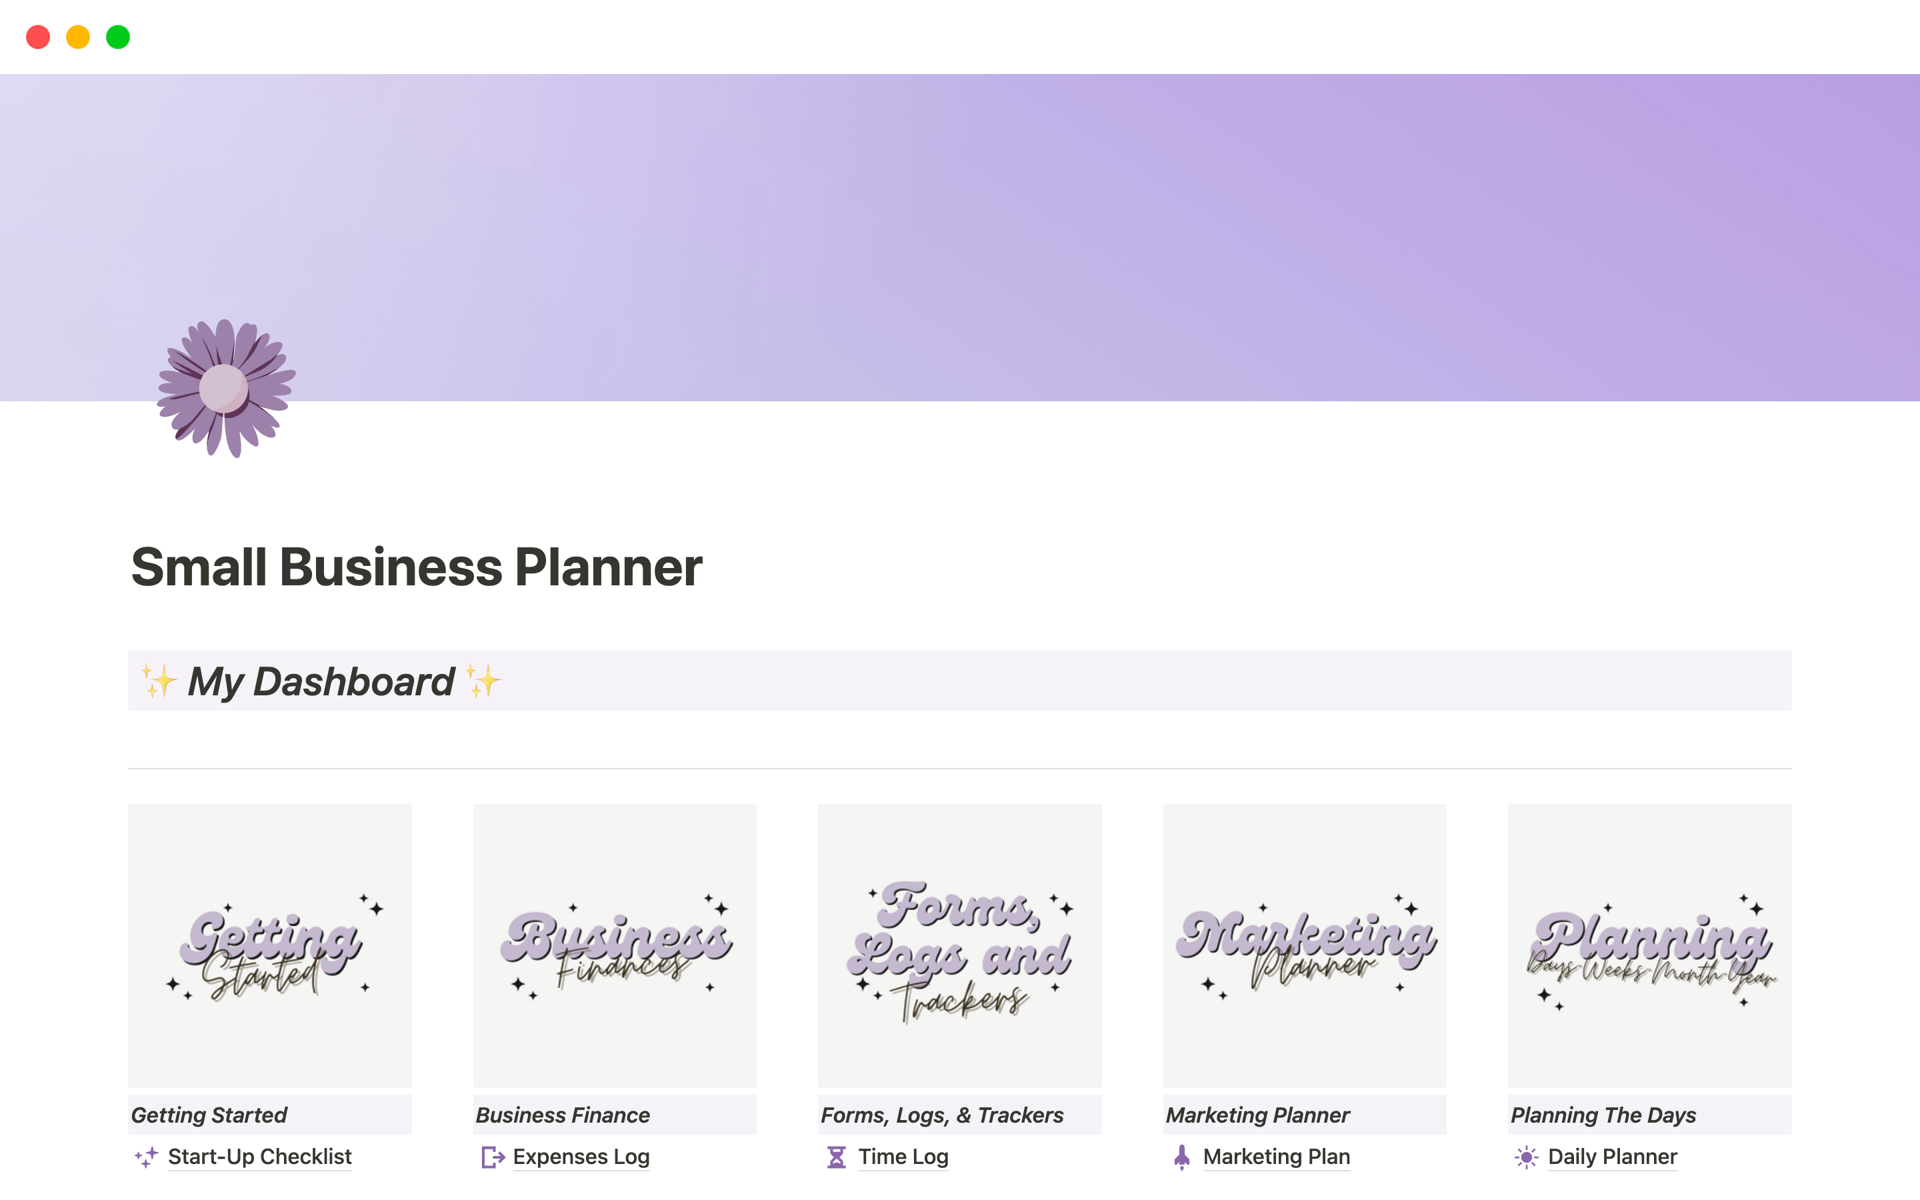 Small Business Planner, the ultimate tool for entrepreneurs and small business owners seeking organization and efficiency all in one place. Designed with the busy individual in mind, this planner is crafted to help you streamline your workflow and stay on top of your game.